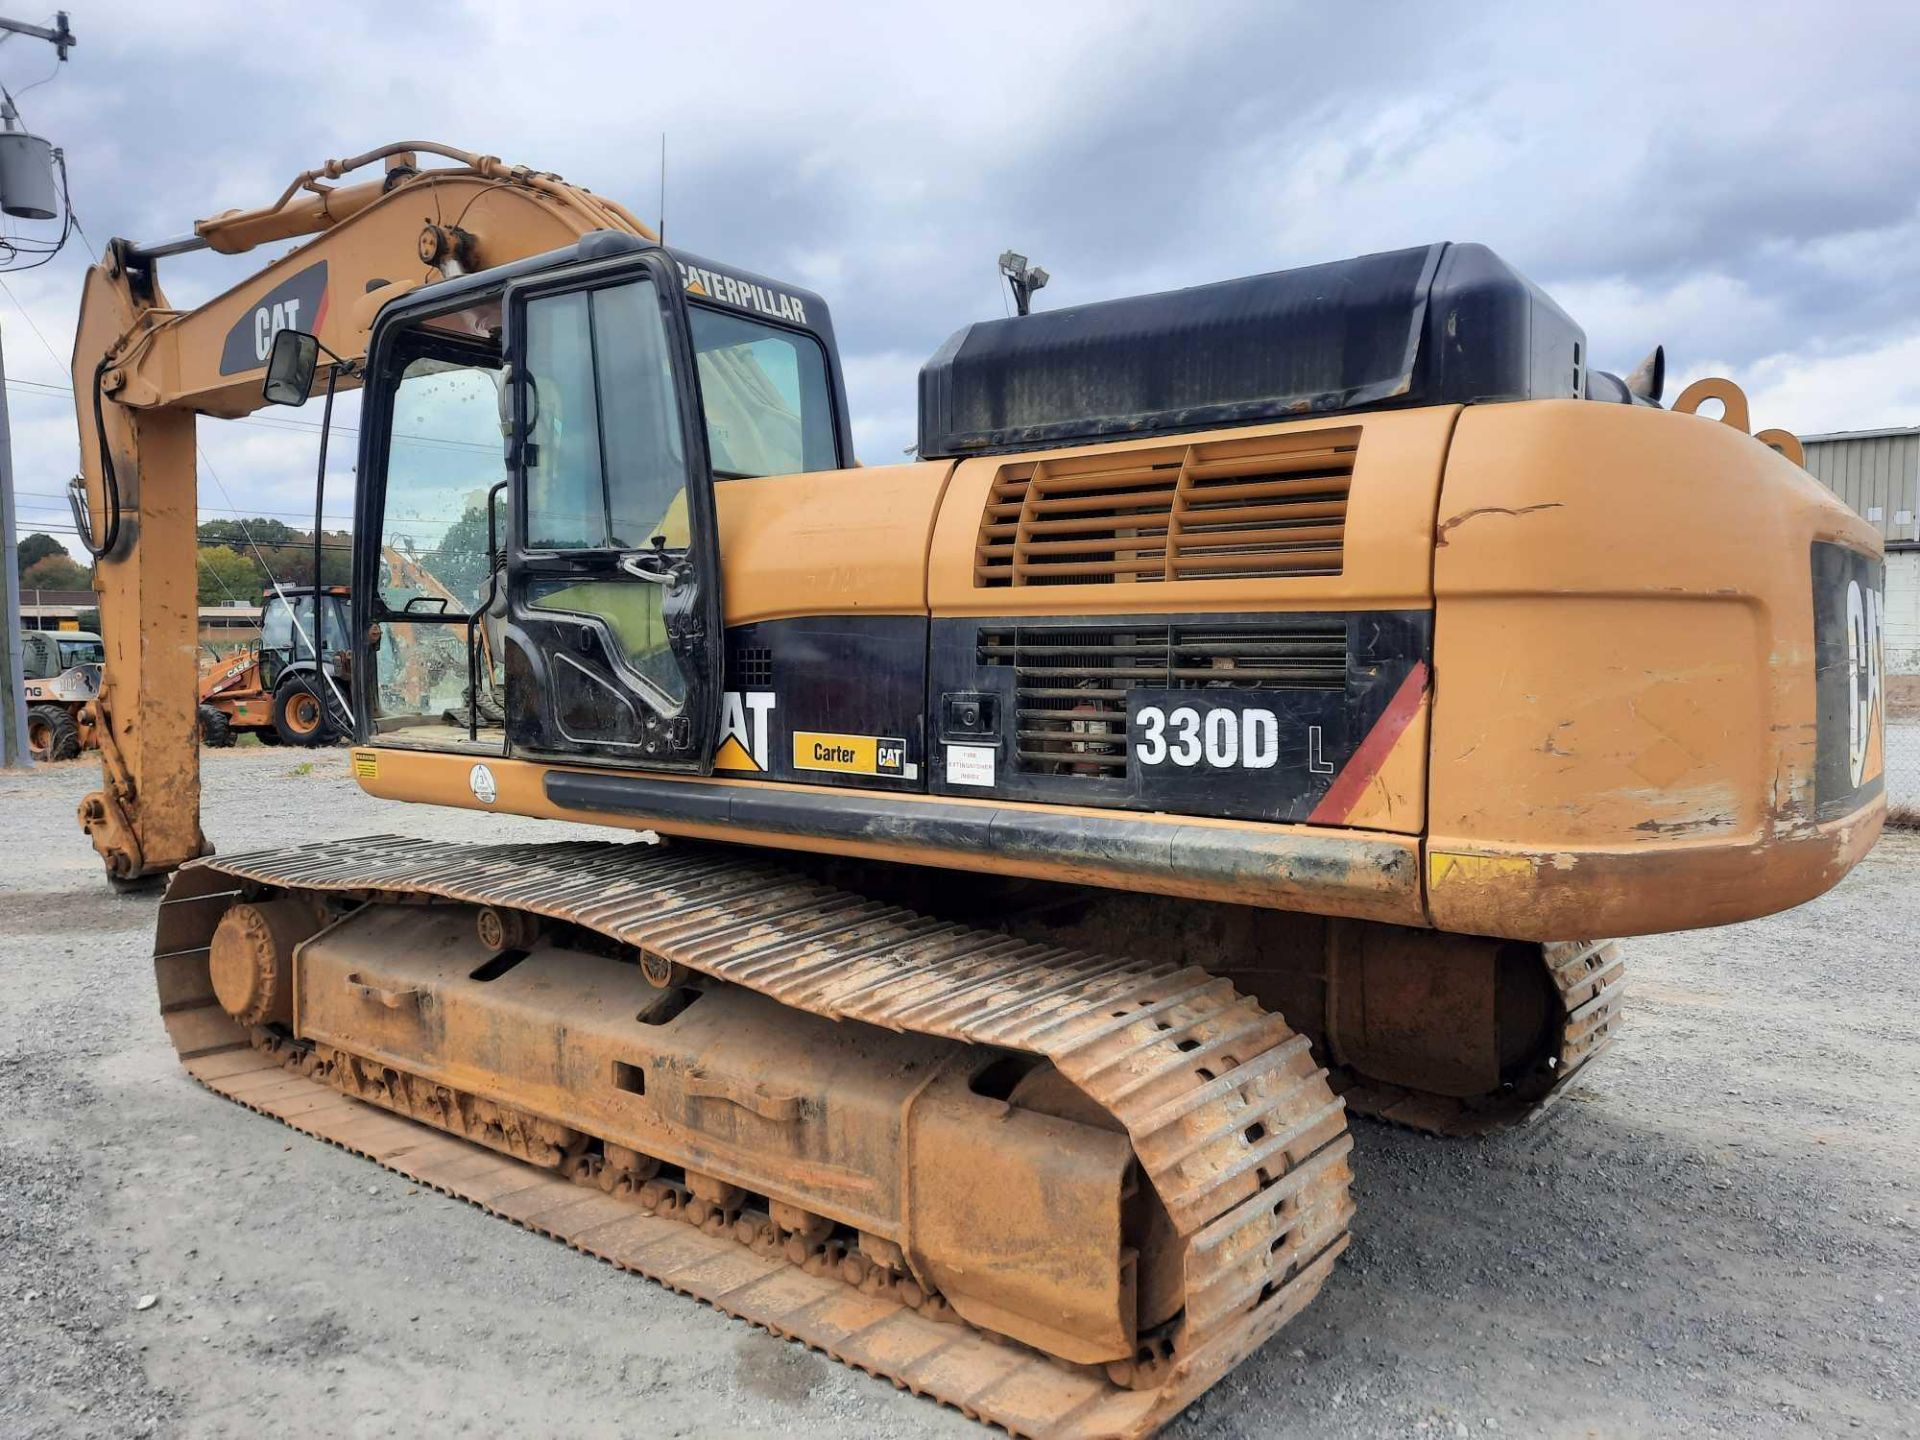 (SUBJECT TO OWNER CONFIRMATION) 2007 Caterpillar 330DL Excavator - Image 11 of 80